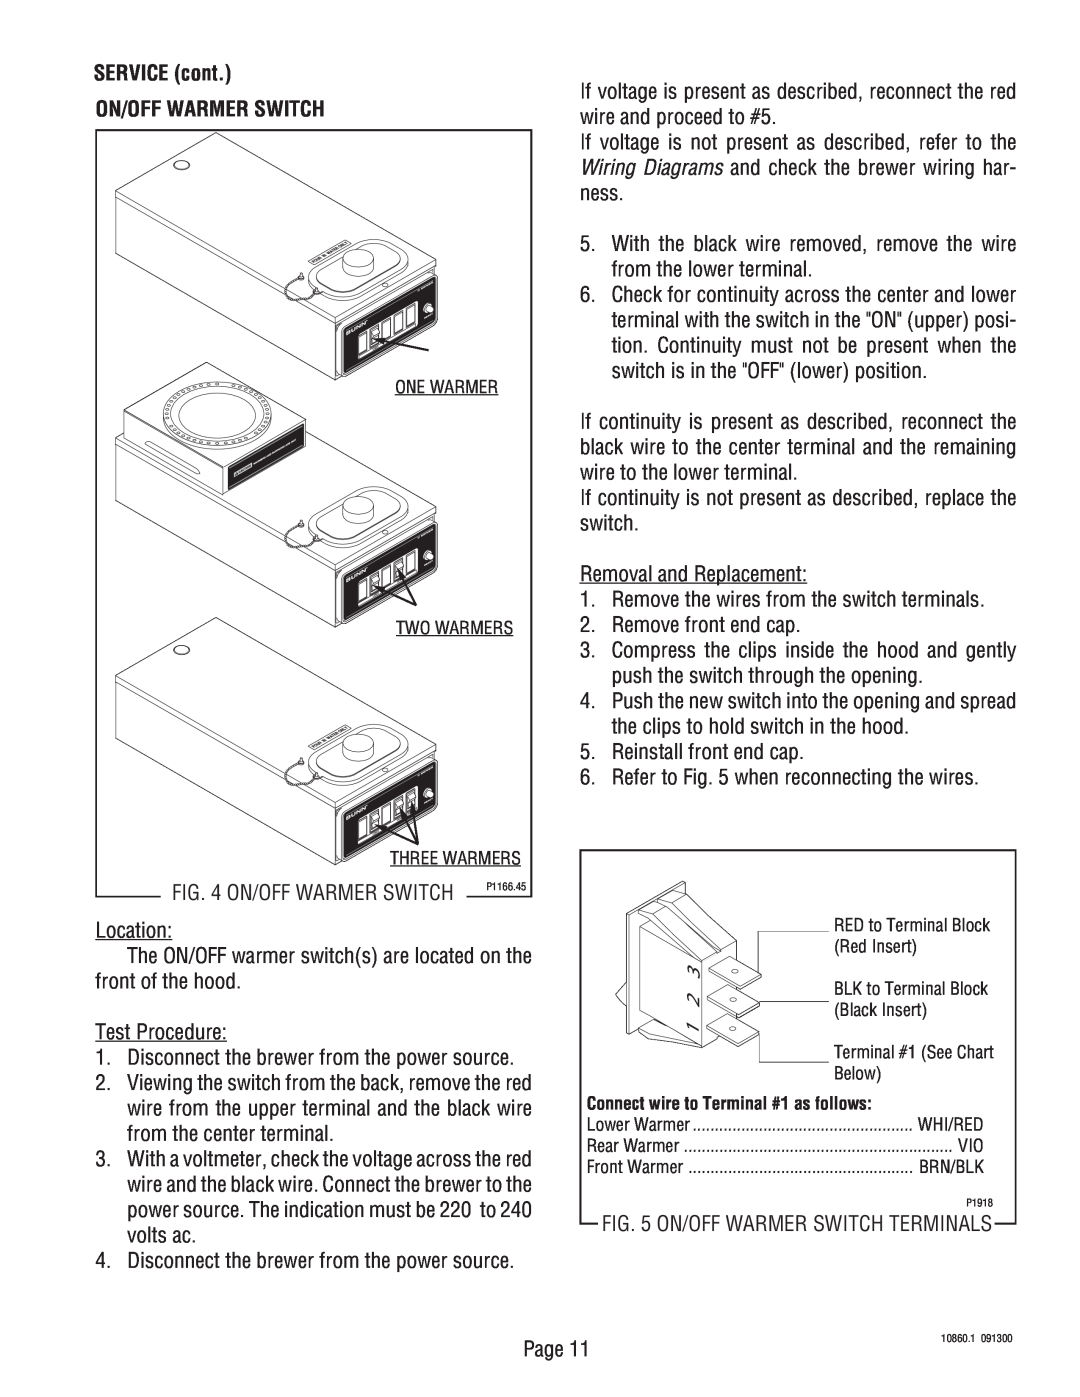 Bunn VP17A service manual SERVICE cont ON/OFF WARMER SWITCH 